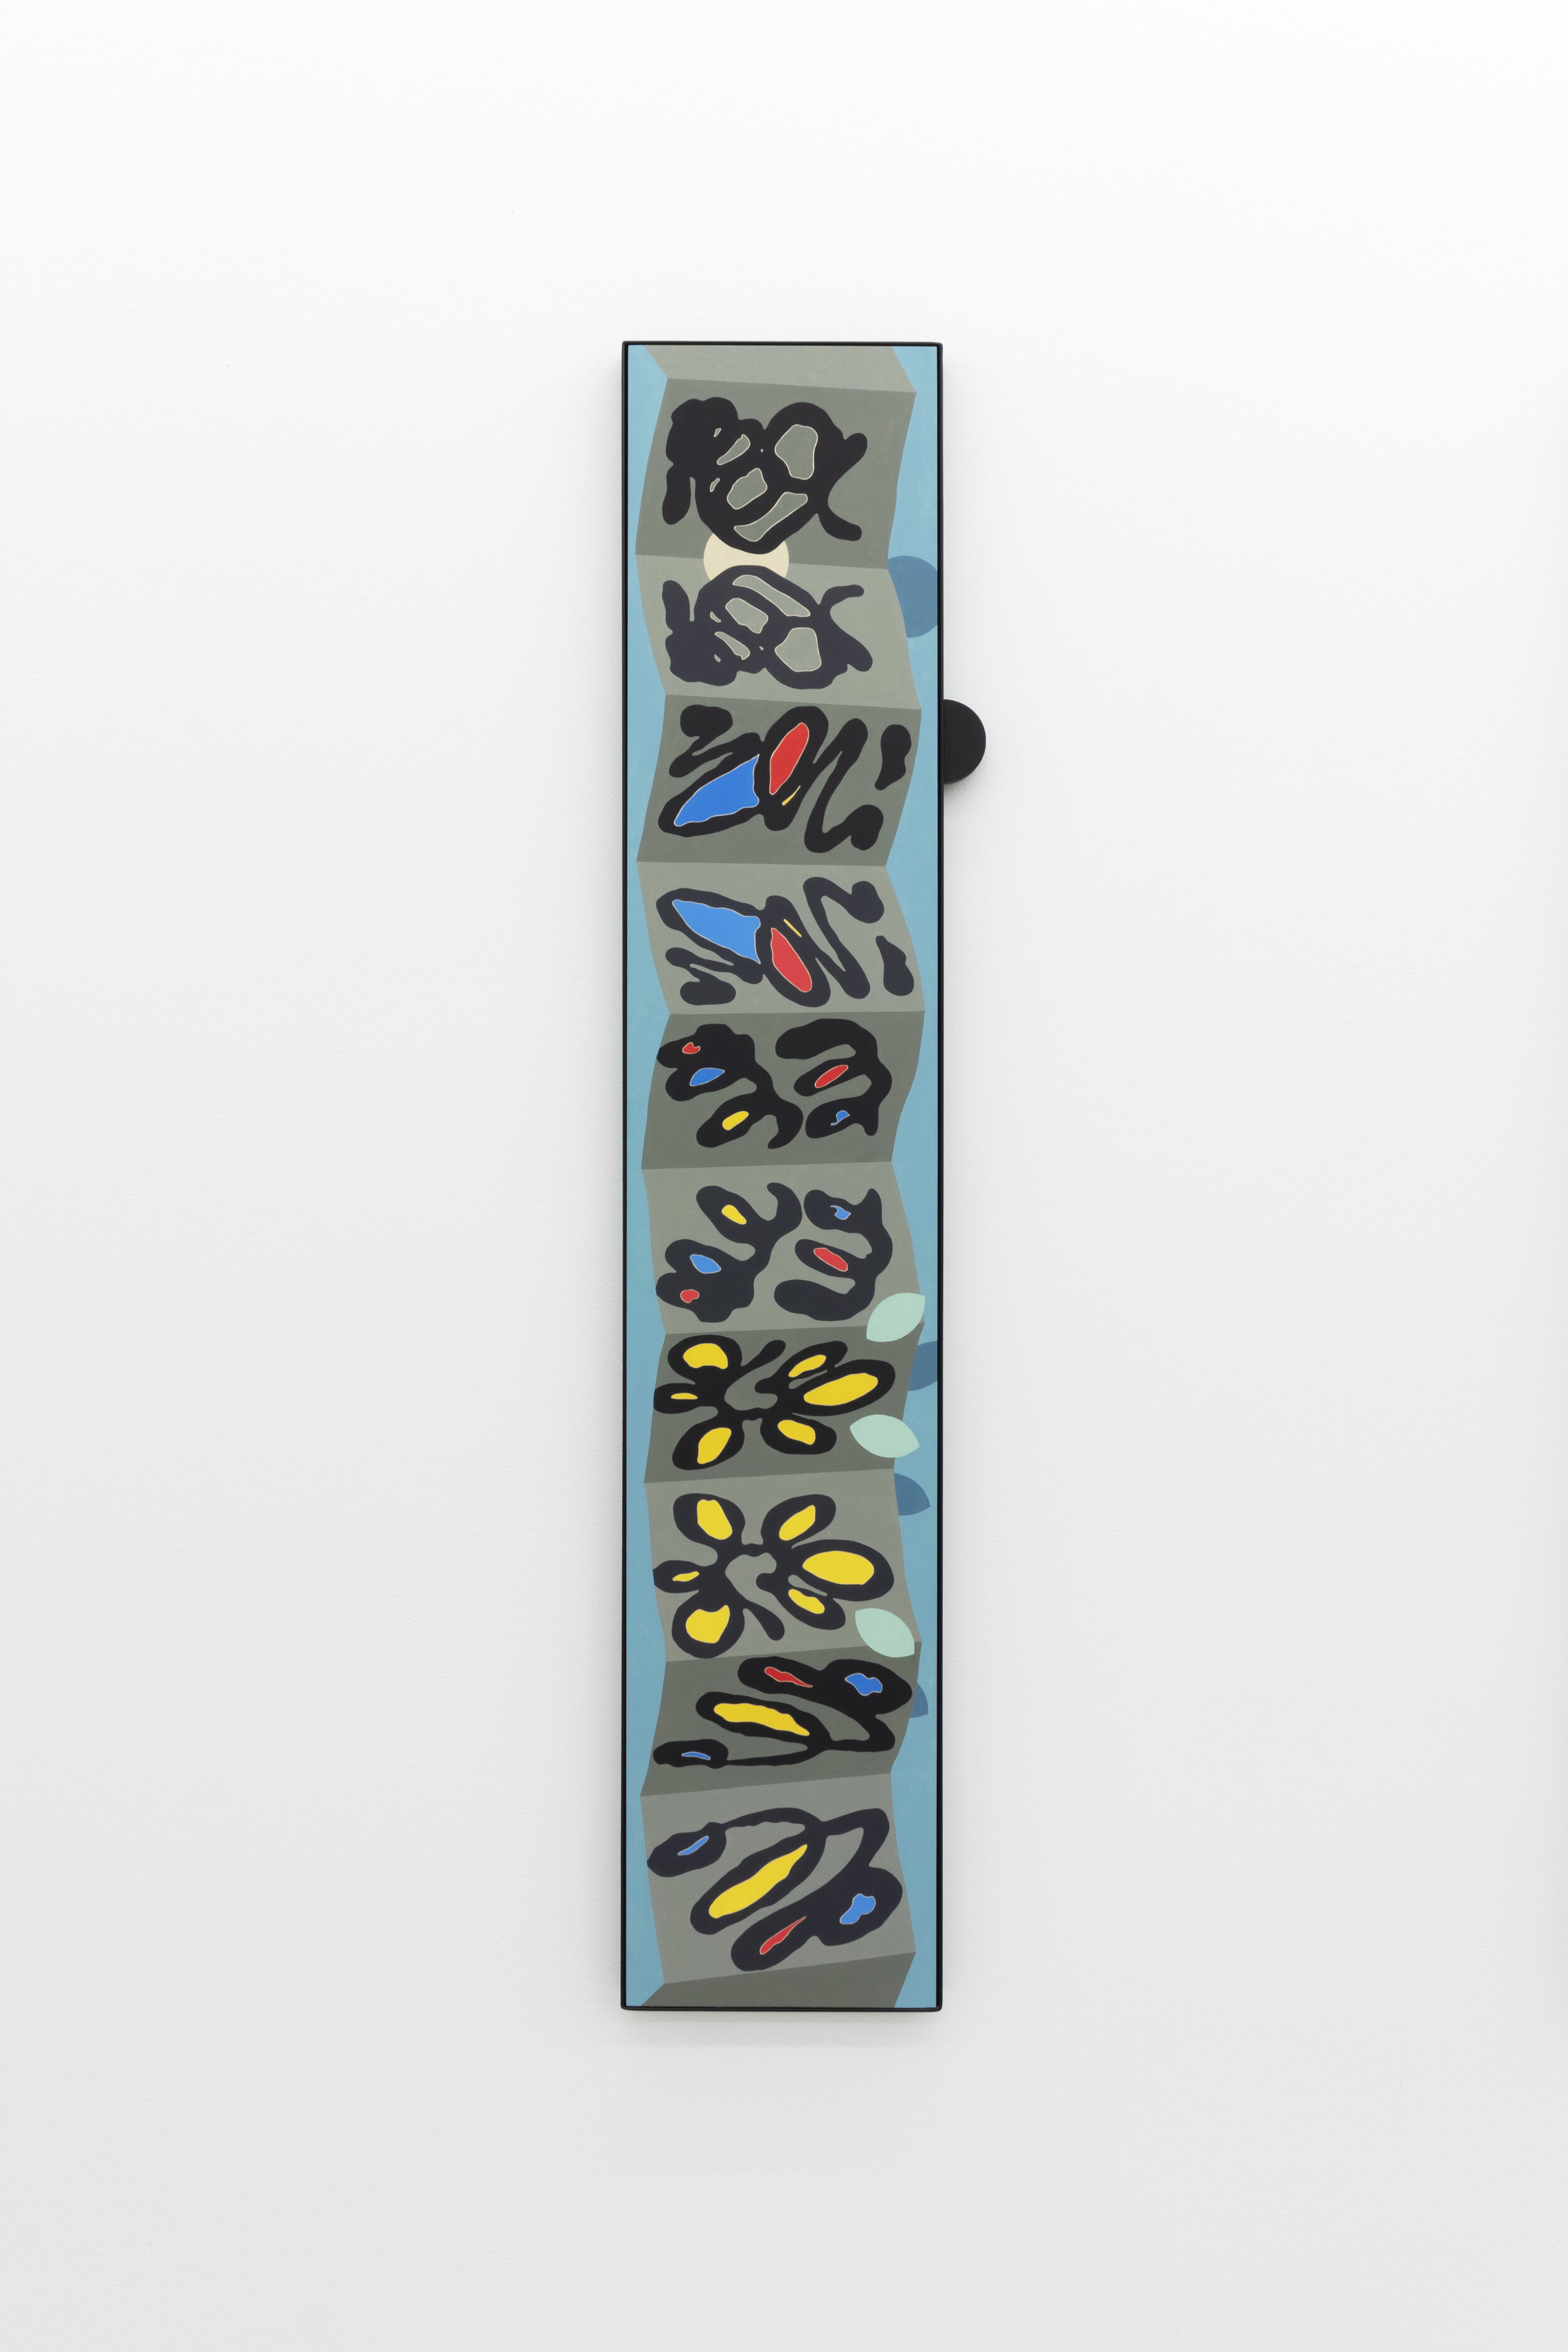  Vanessa Maltese    Hypothesizing coincidence no. 6 , 2020   Oil on panel, powder coated steel, wood, magnets   60.25 x 11.25 in  